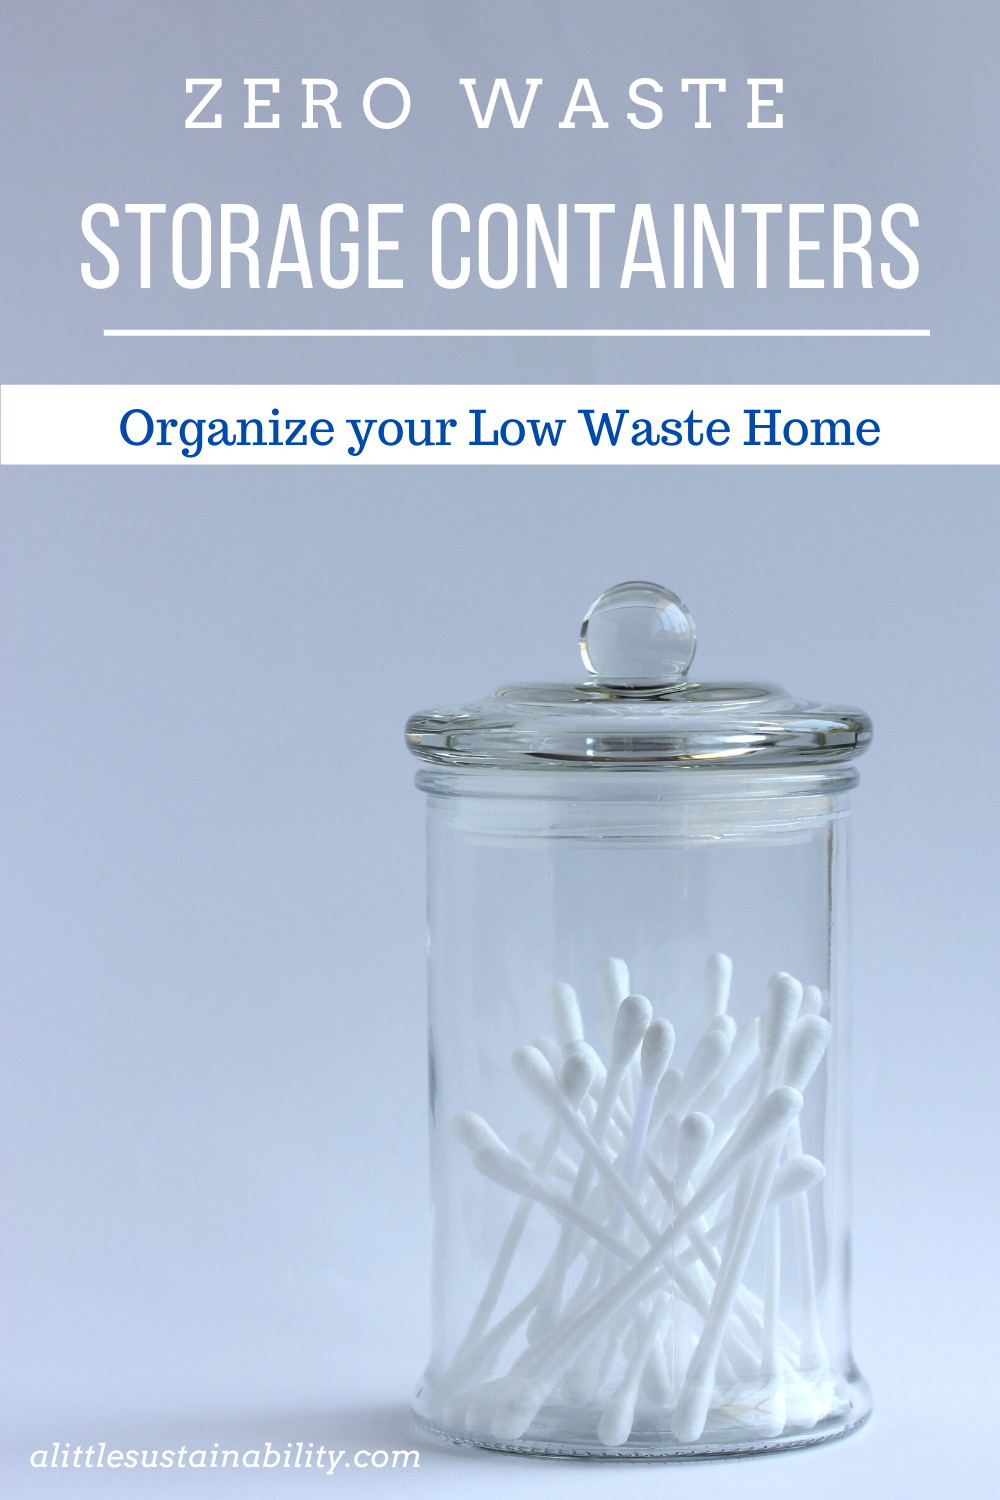 Organizing your low waste home is easy with these zero waste items that are saving the planet and can save you money.  www.alittlesustainability.com